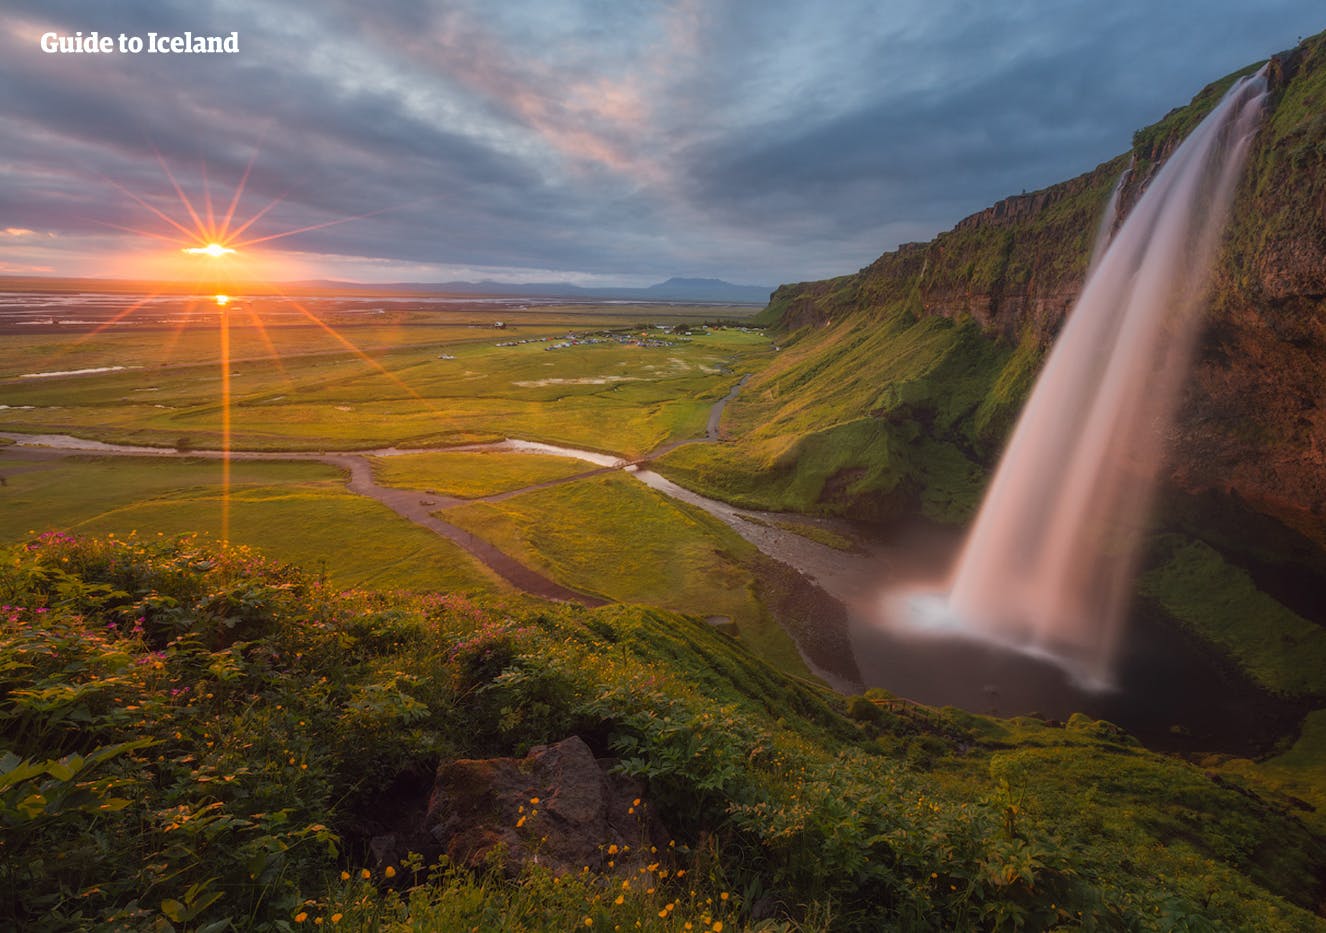 The beautiful Seljalandsfoss waterfall tumbles over a concaved cliff face